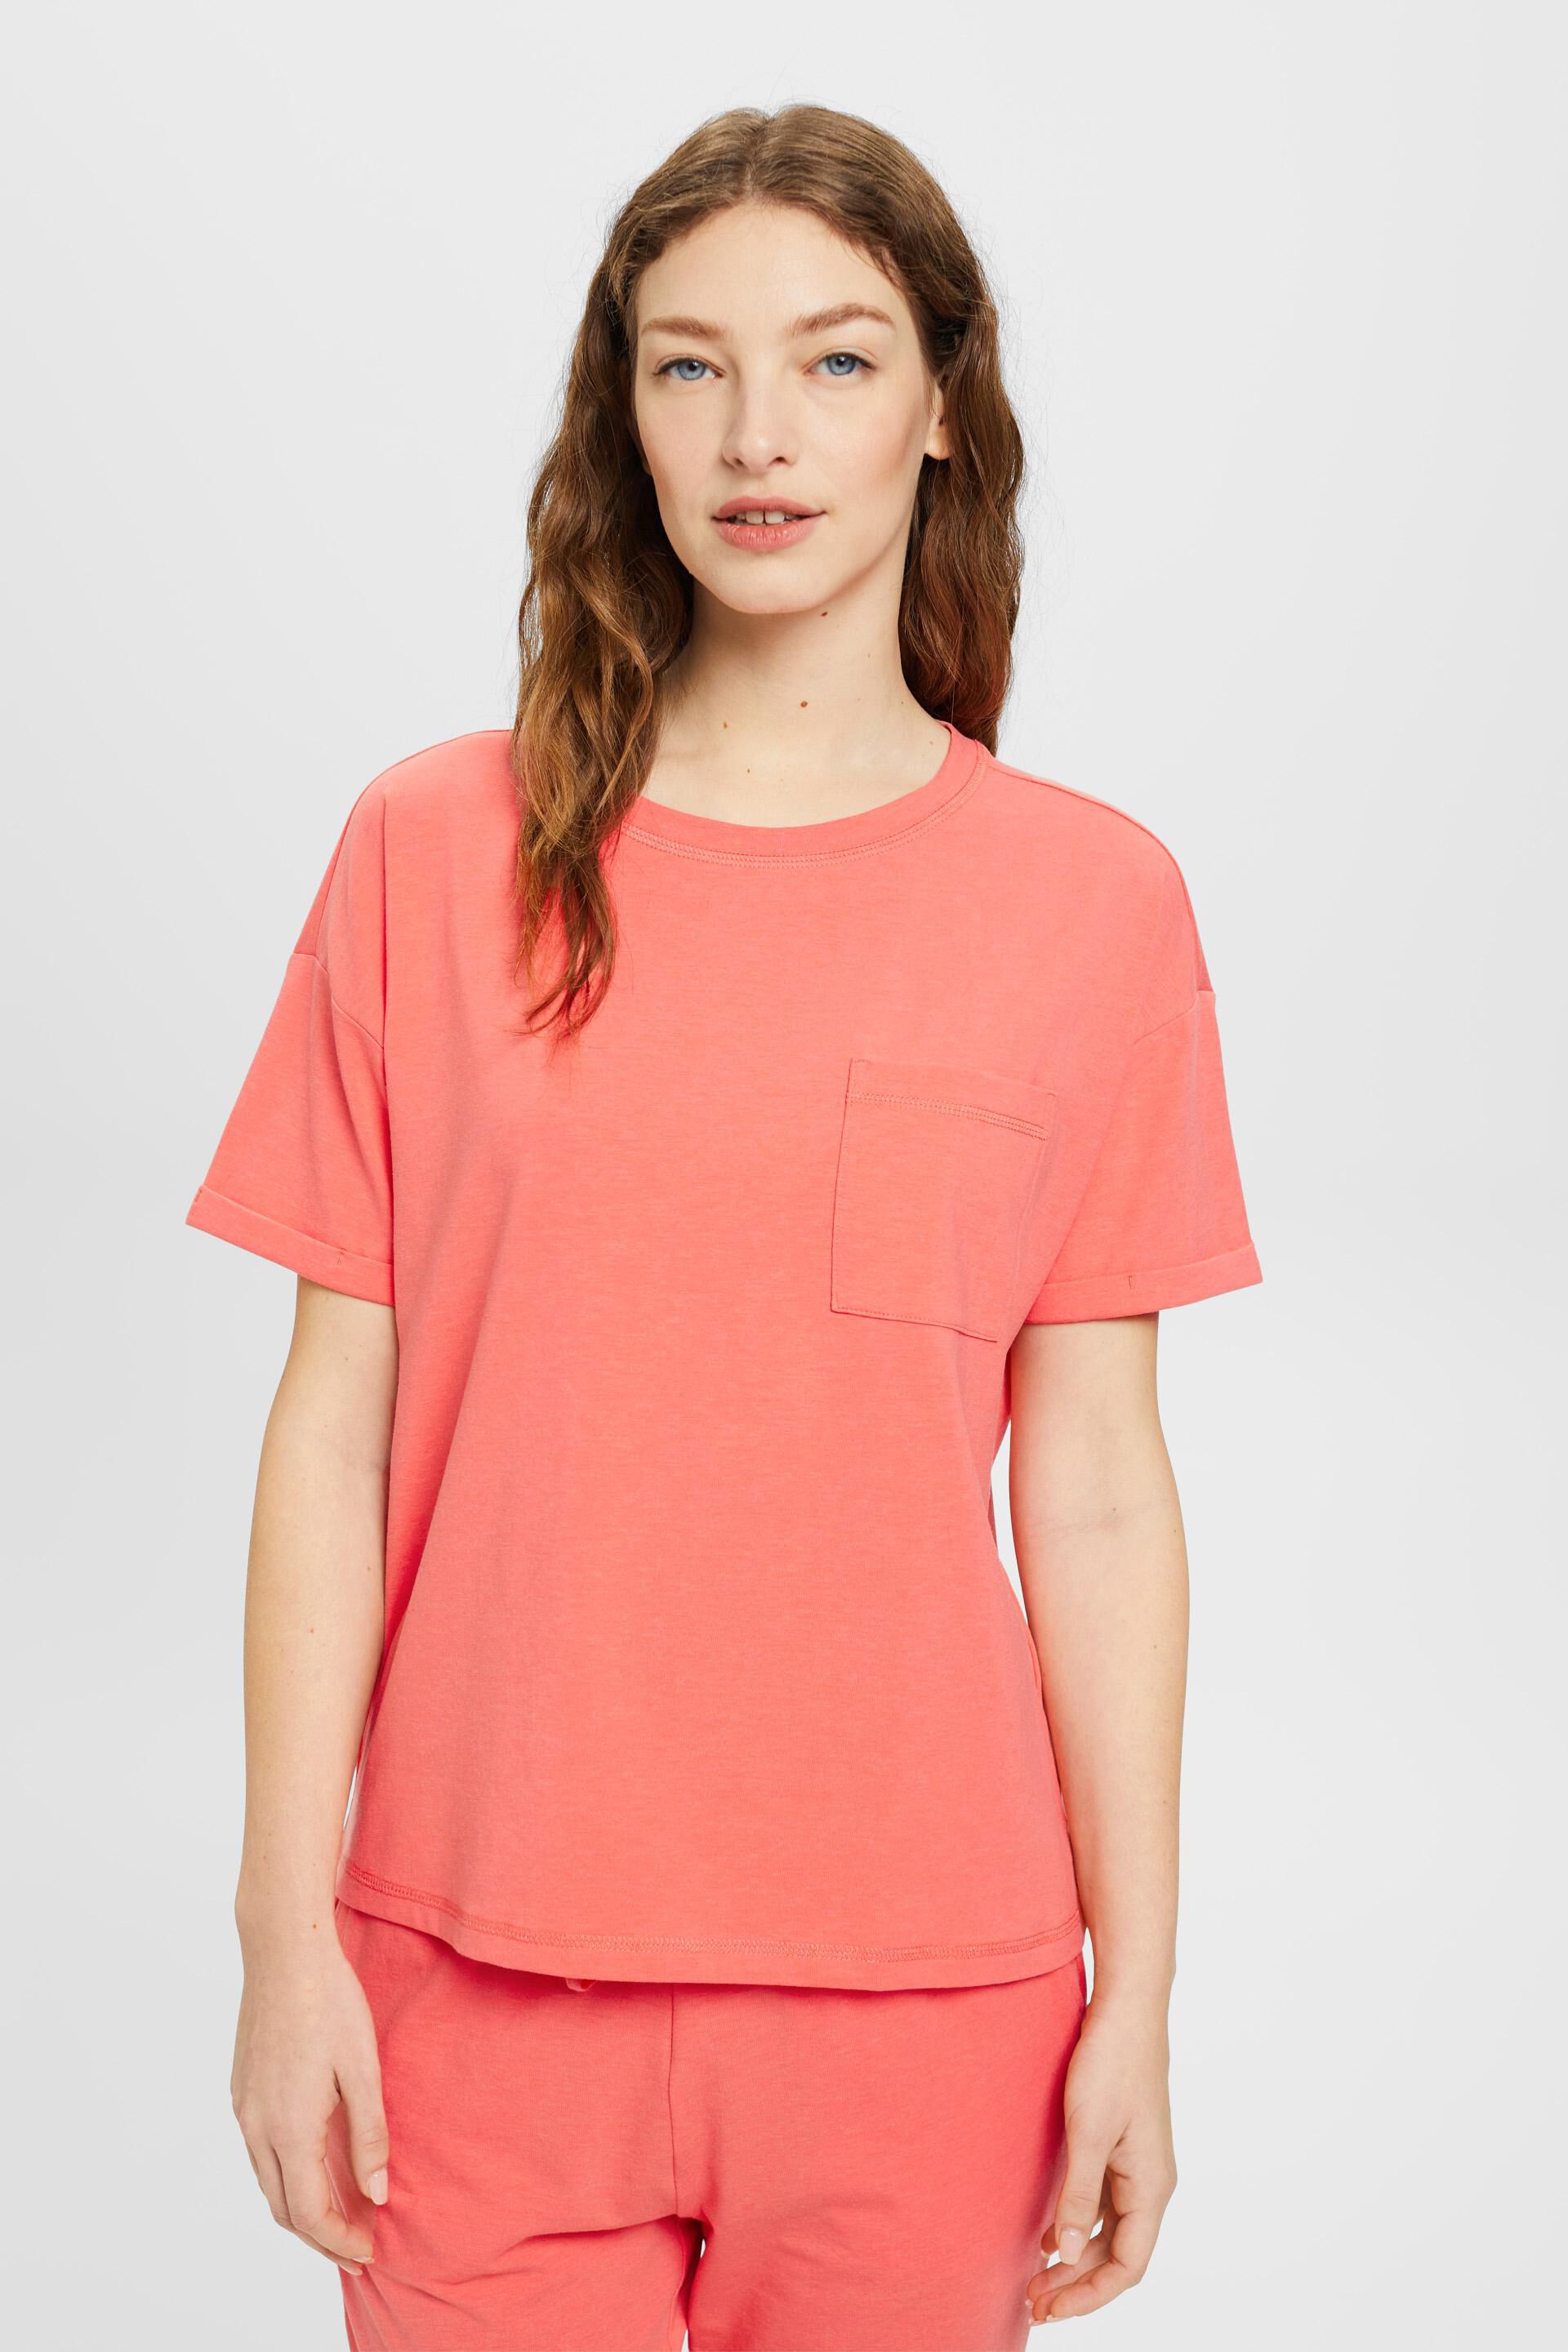 Espritkleider T-shirt with a in cotton breast pocket blended